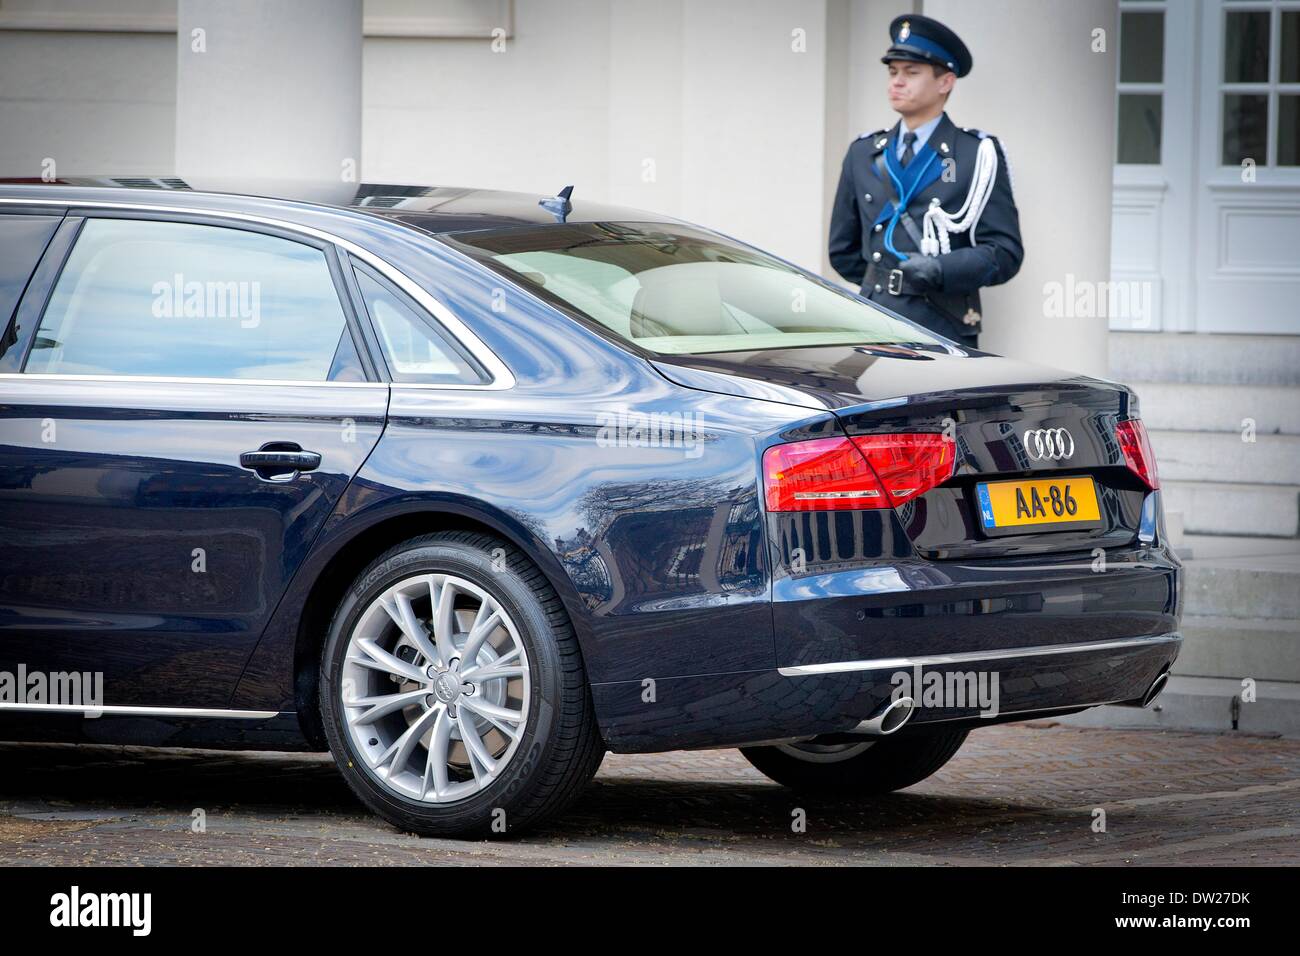 The Hague, The Netherlands. 25th Jan, 2014. New royal car of the King, Audi  A8, seen as King Willem-Alexander and Queen Maxima of The Netherlands  welcome the Olympic medal winners at Palace